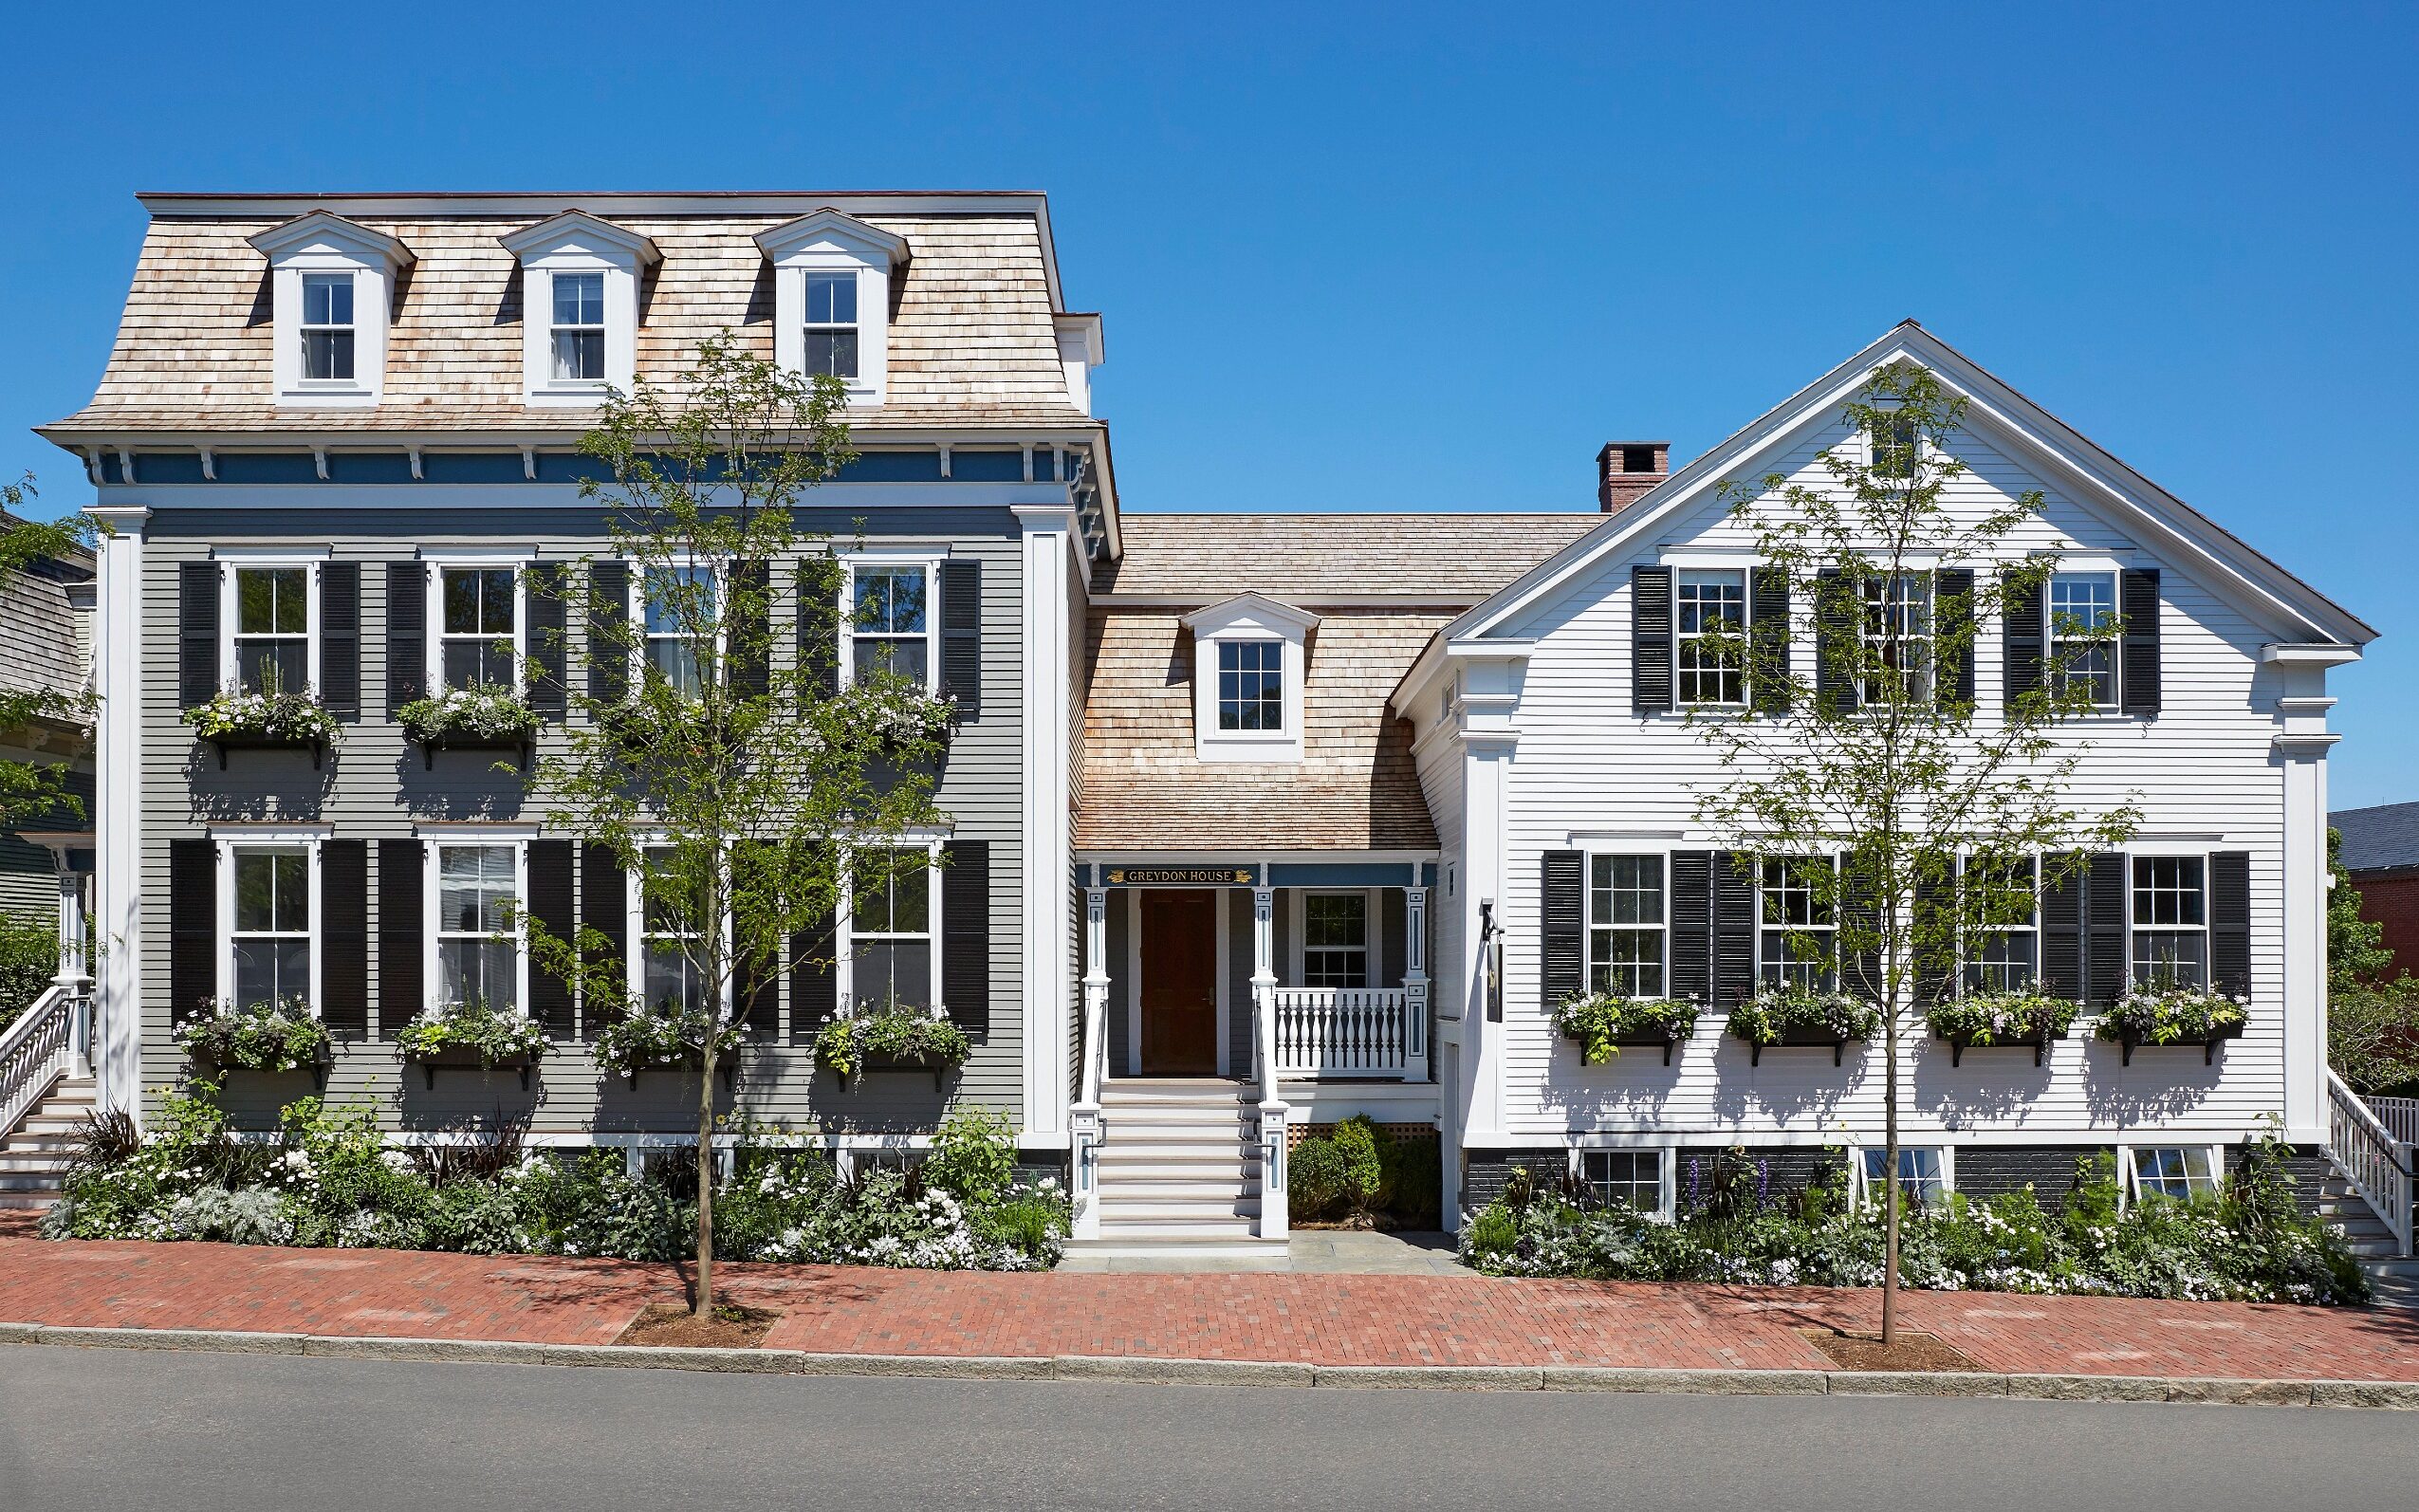 This Former Sea Captain’s Home Is Nantucket’s Most Stylish Boutique Hotel